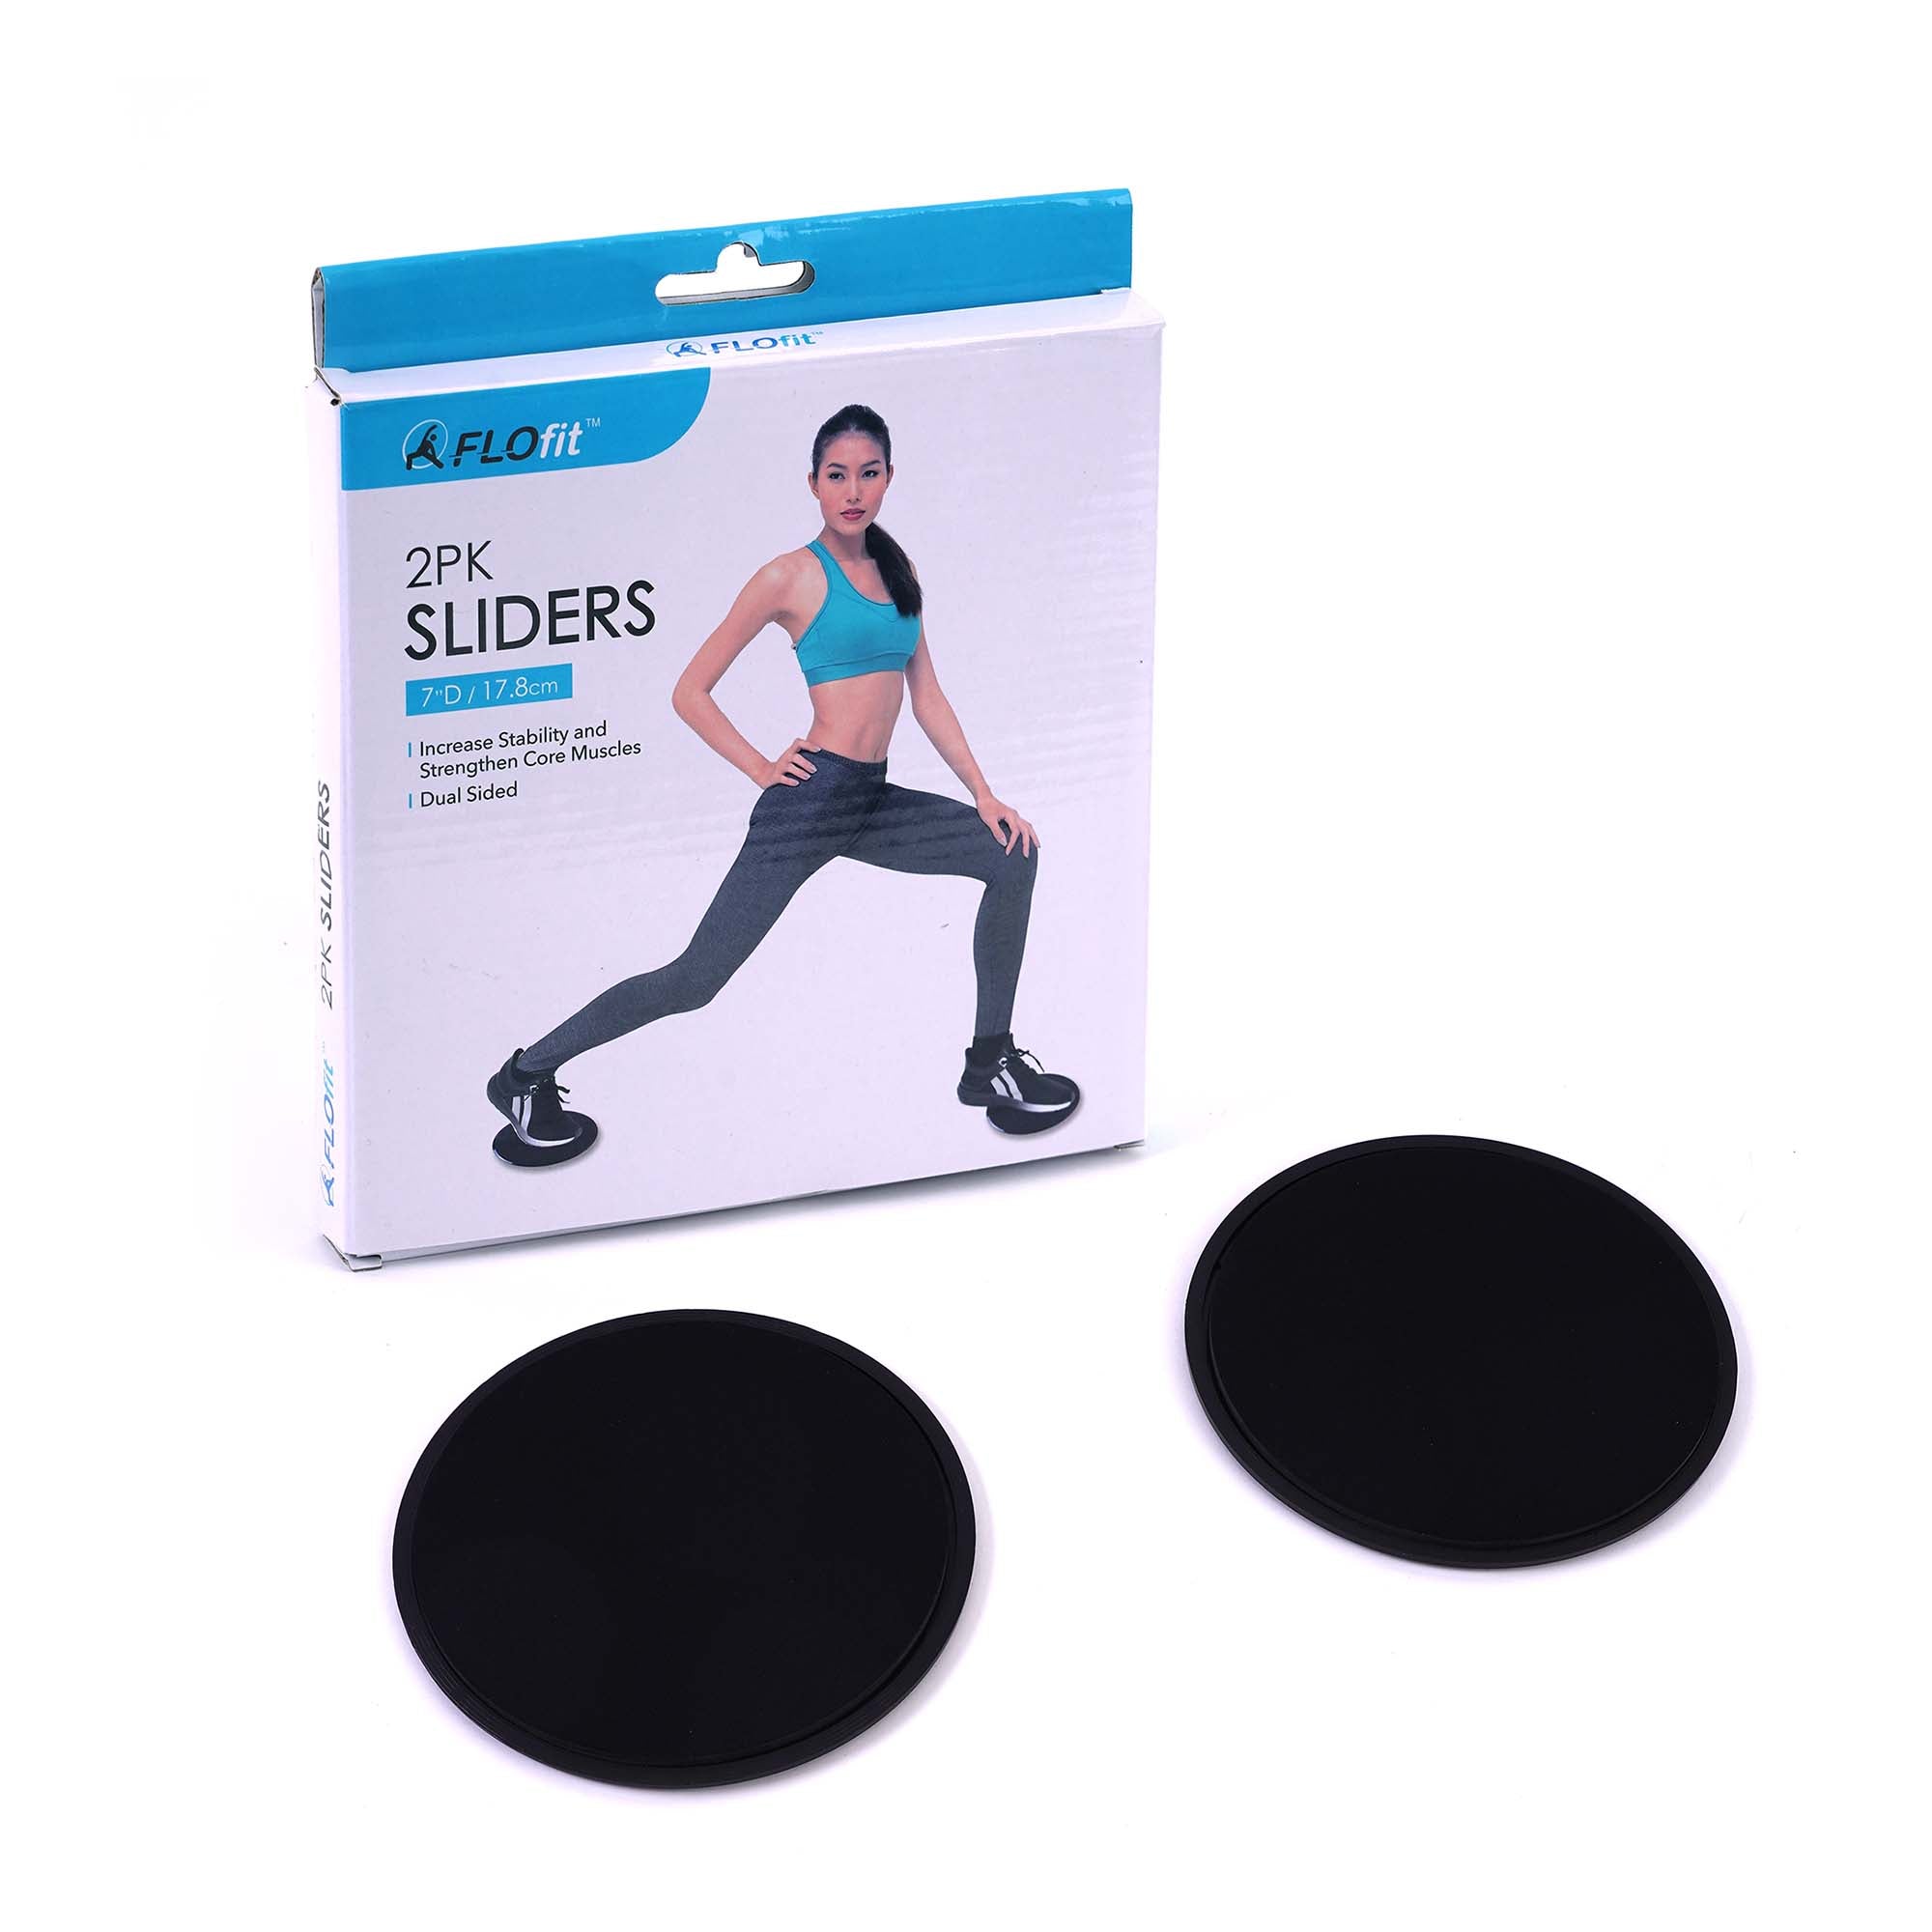 Wholesale Fitness Supply, Discount Yoga Products